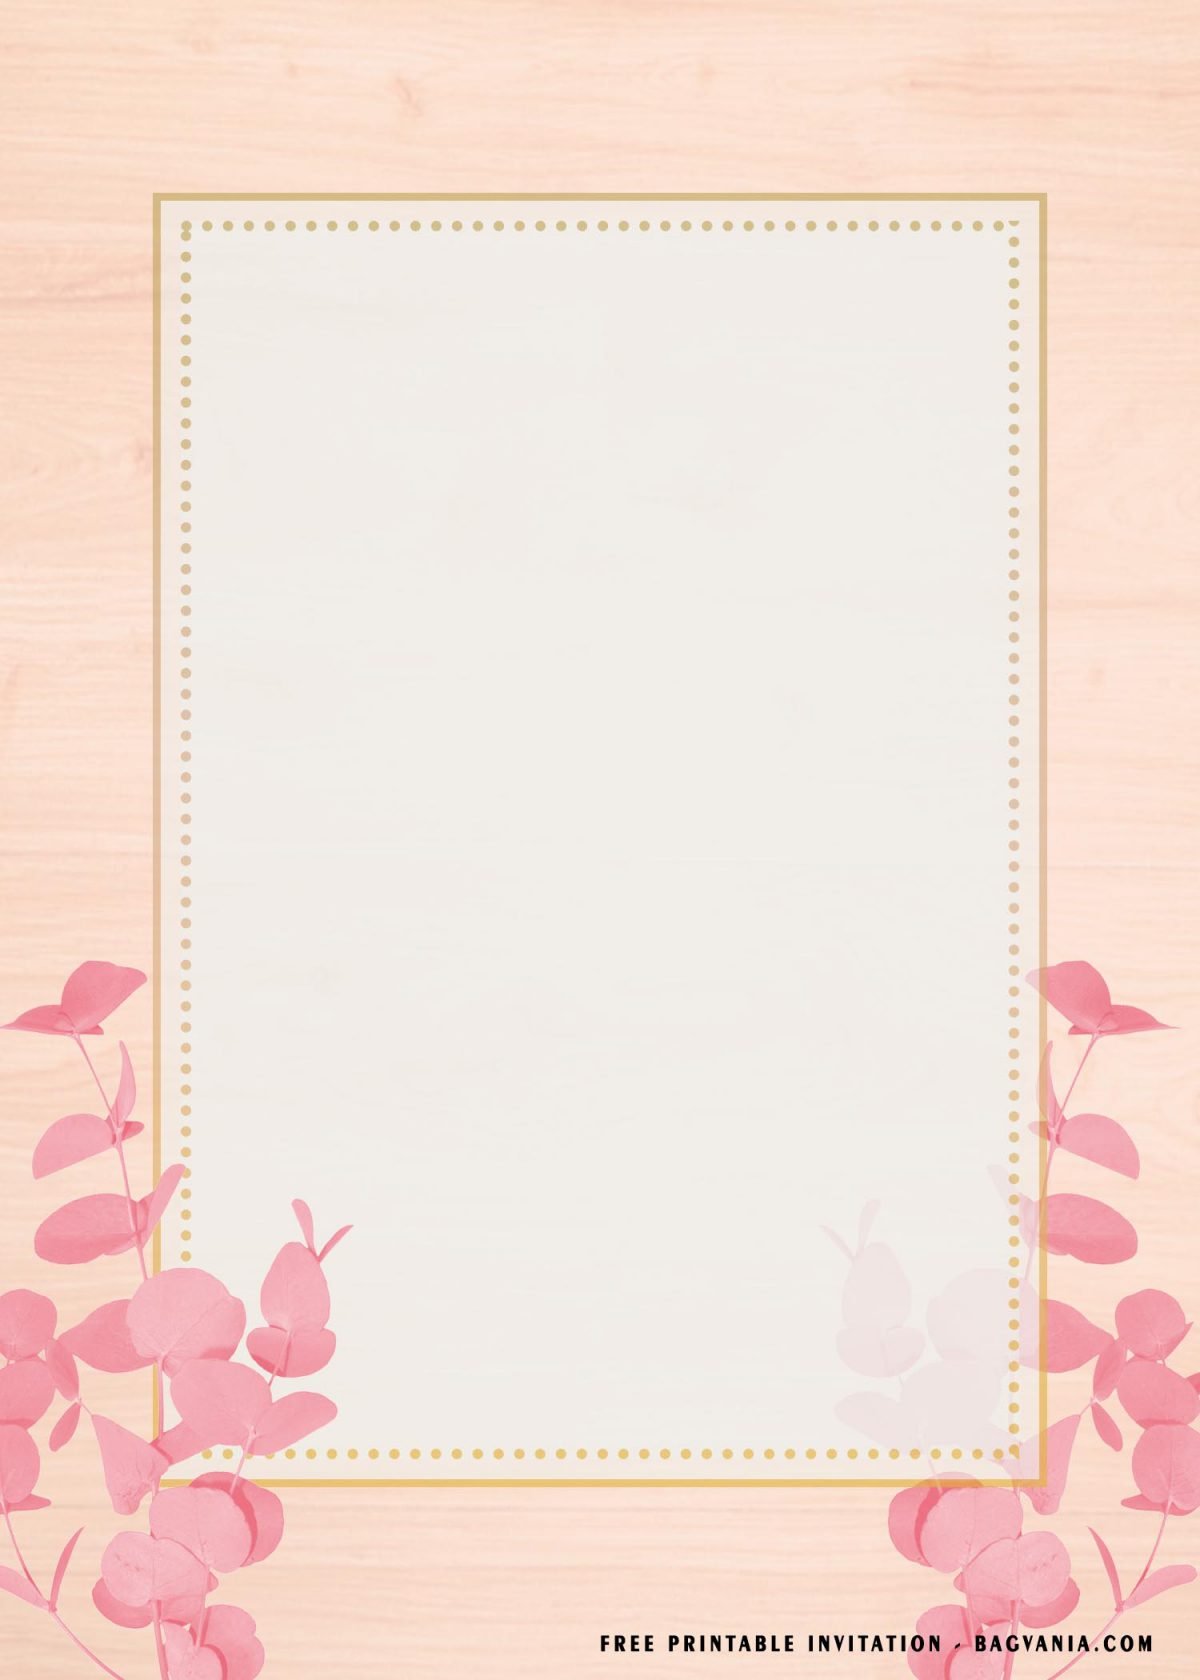 Free Printable Pink Flower Gold Frame Baby Shower Invitation Templates With Rectangle Shaped Text Frame